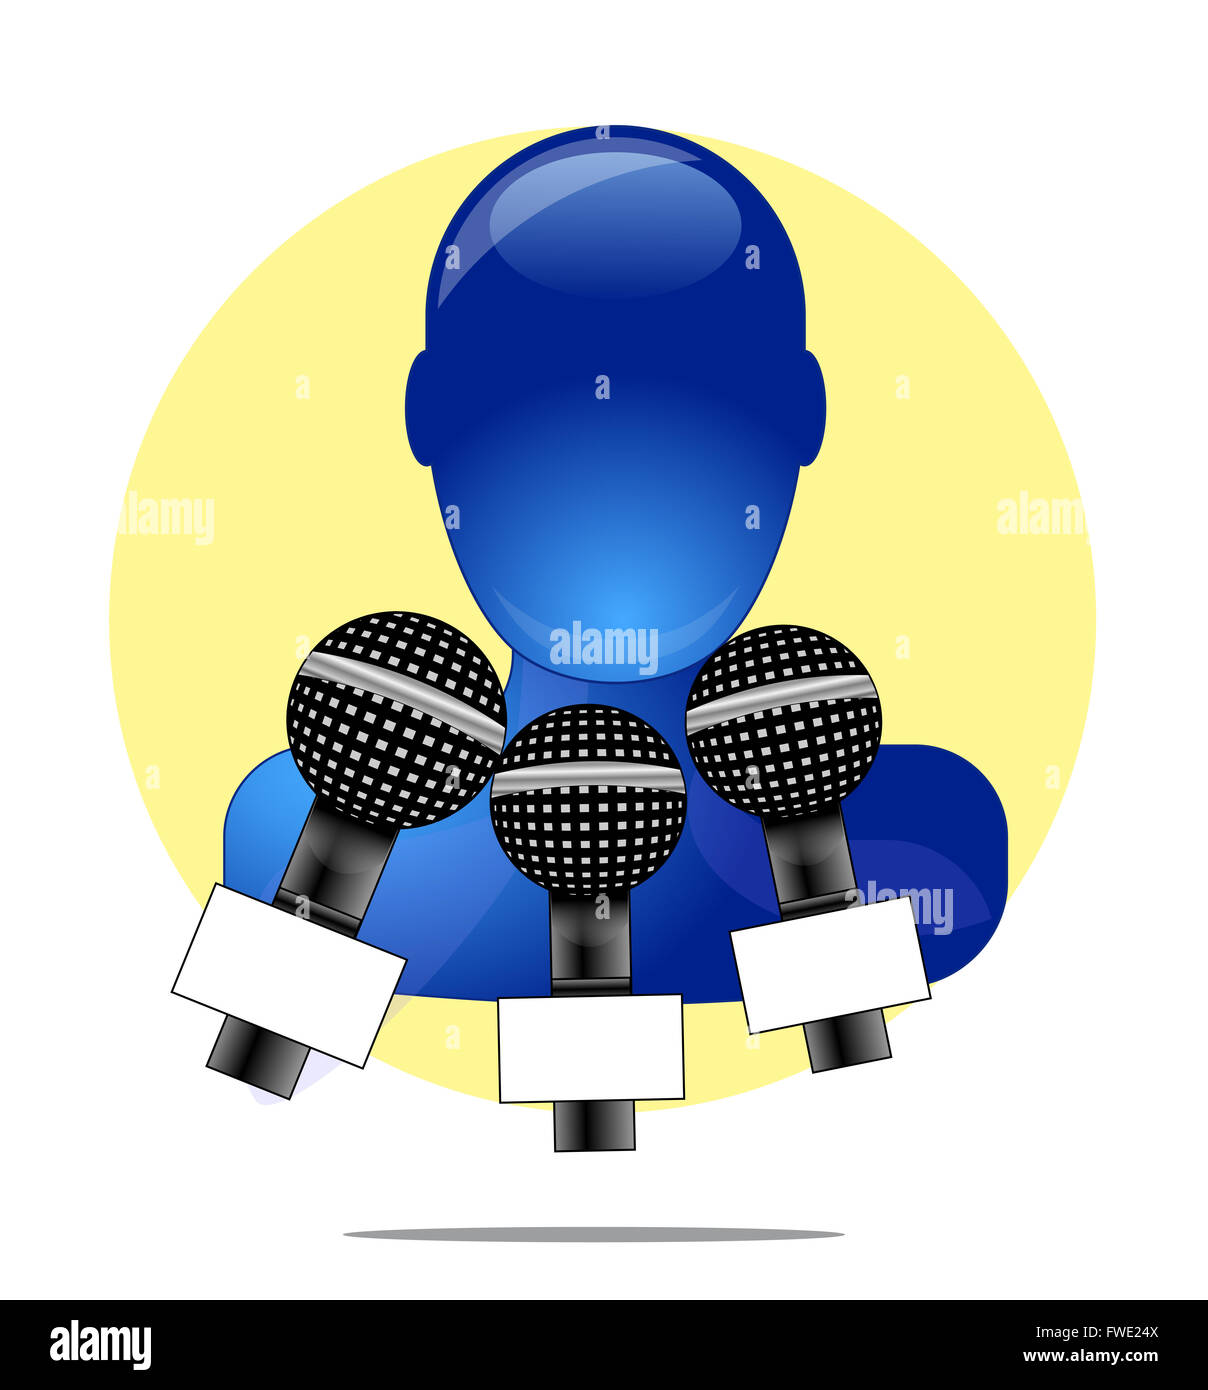 Illustration of blue person with three microphones with yellow circle background Stock Photo